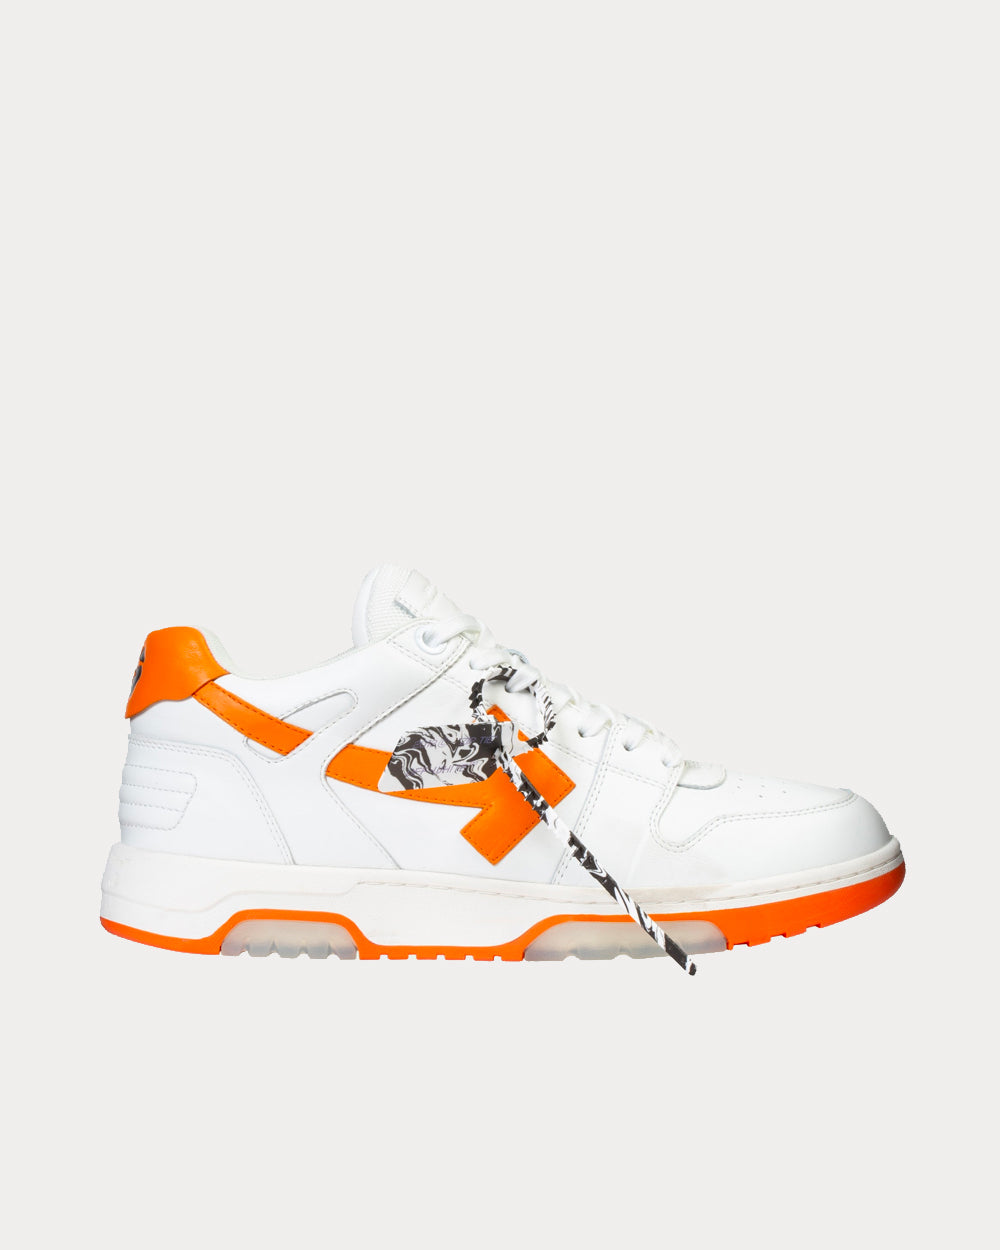 Off-White OF OFFICE "OOO" White Low Top Sneakers - Sneak in Peace